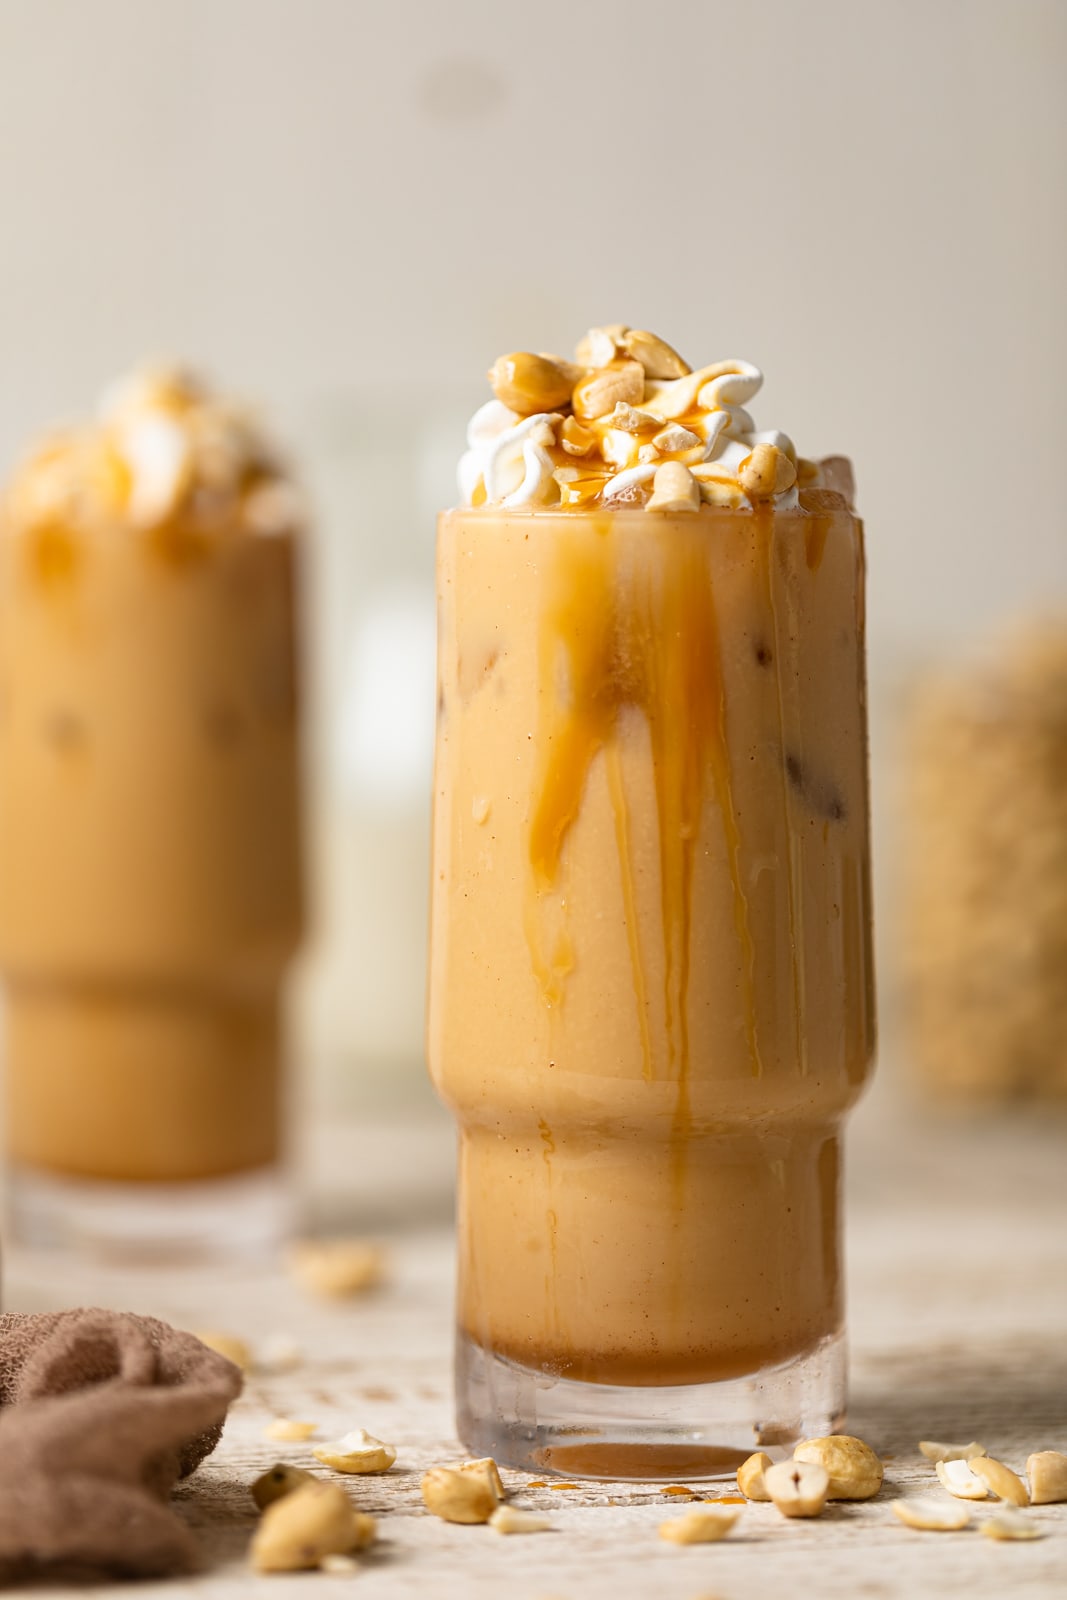 Salted Caramel Cashew Latte in a tall glass with caramel dripping down the side